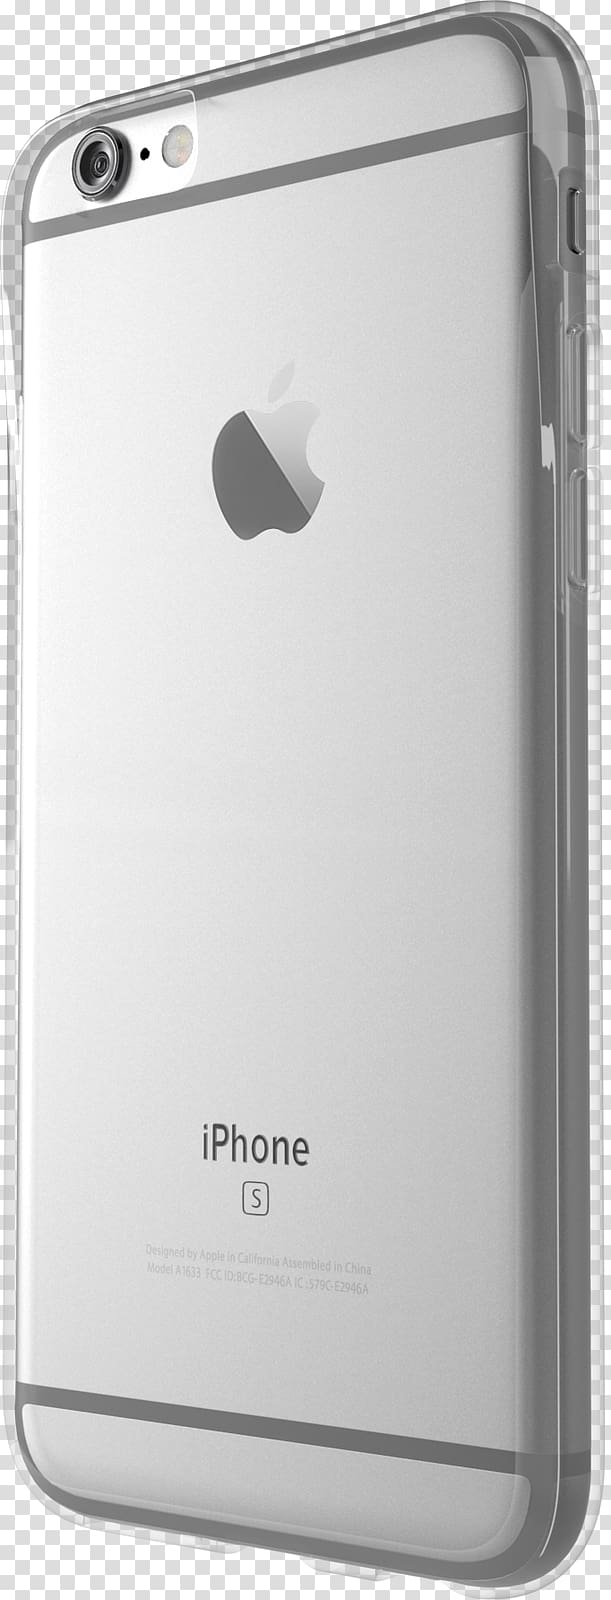 iPhone 6S OtterBox iPhone 6 Plus iPhone 5s, symetric transparent background PNG clipart